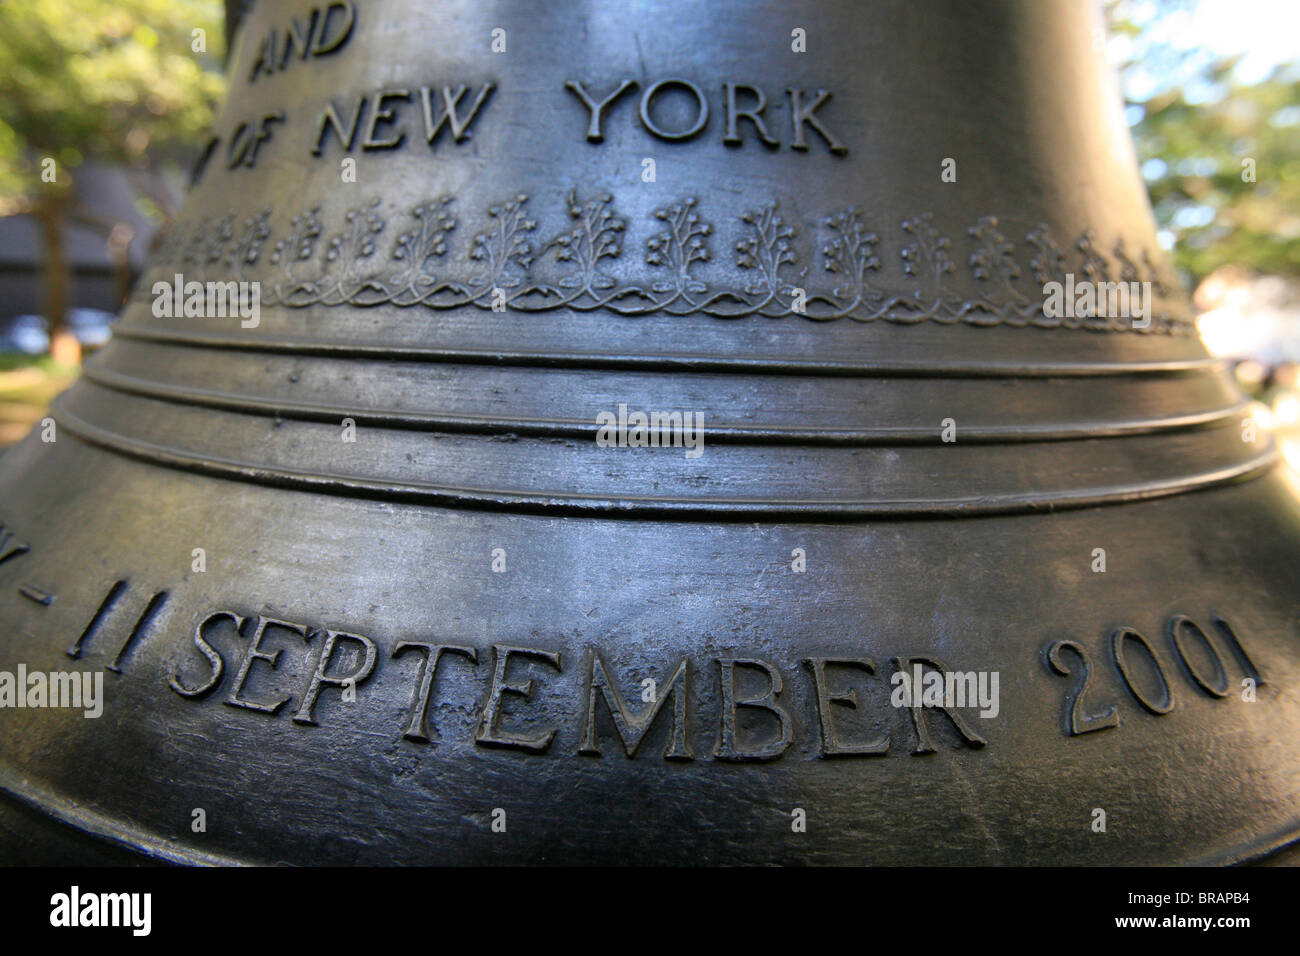 September 11 Memorial Bell offered to New York by London, New York, United States of America, North America Stock Photo